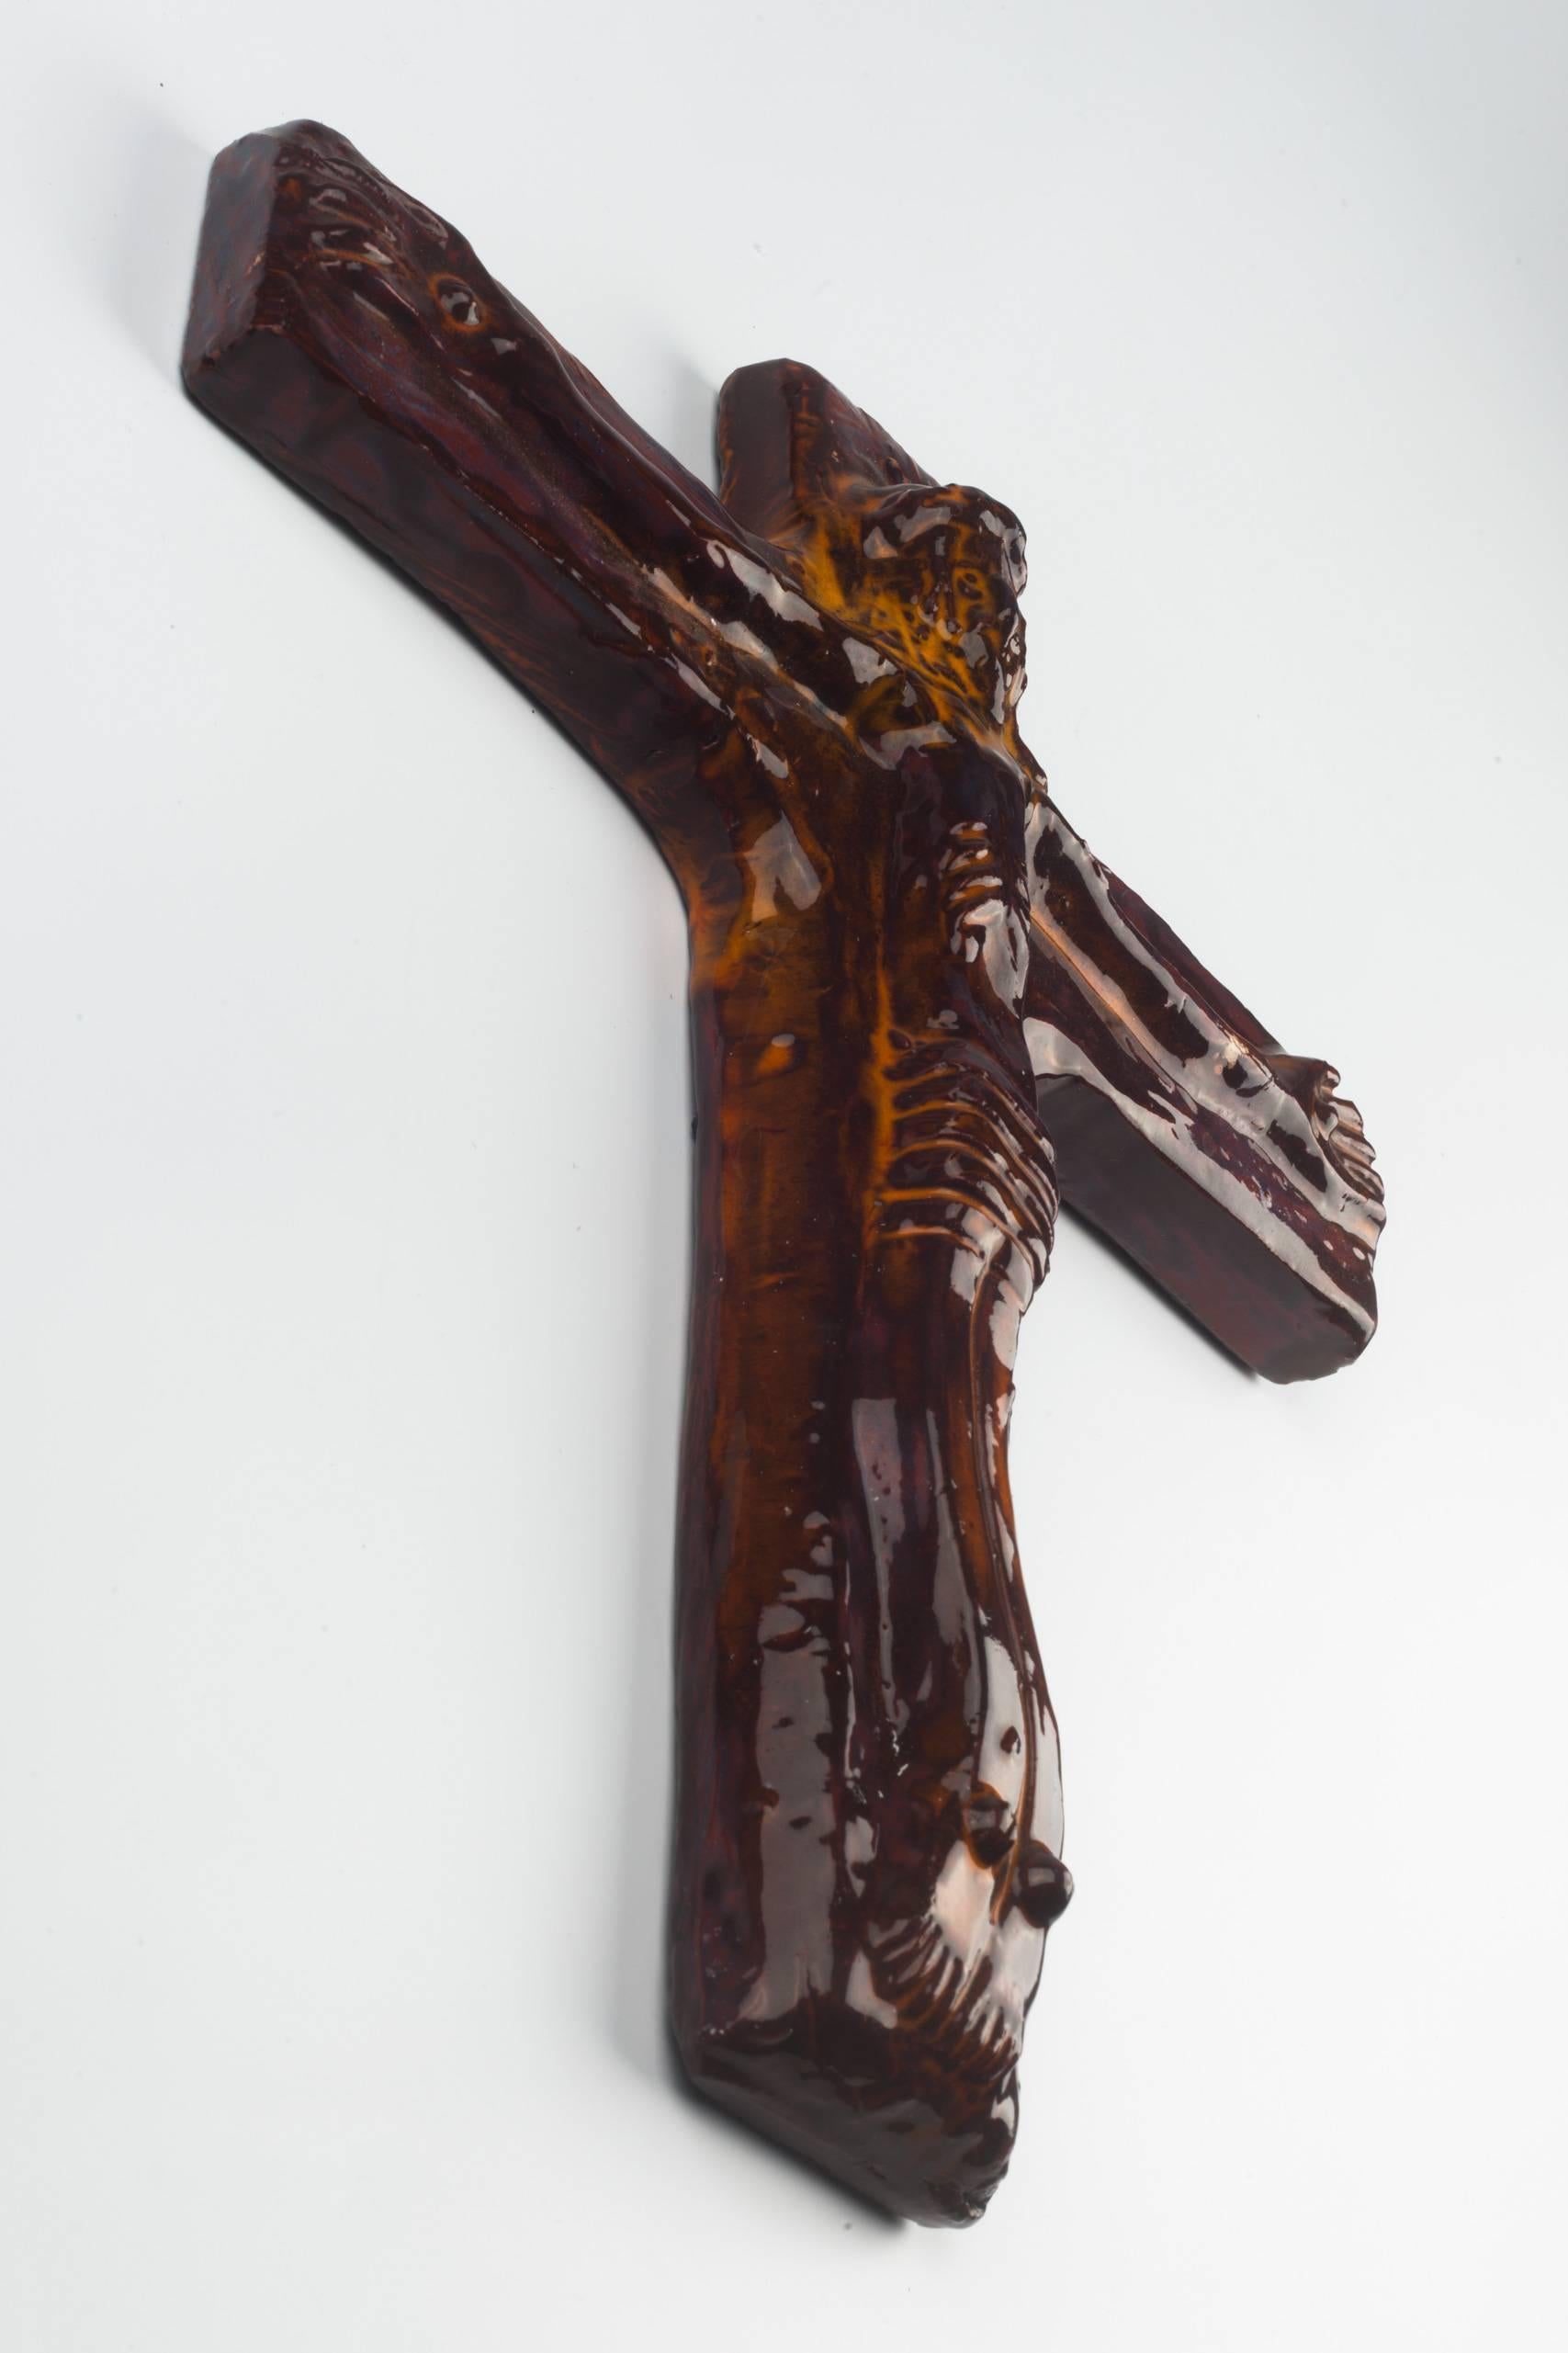 Eleven inch tall crucifix in ceramic, made in Belgium in the 1960s.
Glossy dark brown with yellow accents.

This piece is part of a 69 piece ceramic crucifix collection, all made in Belgium between the 1950 and late 1970s. From modernism to